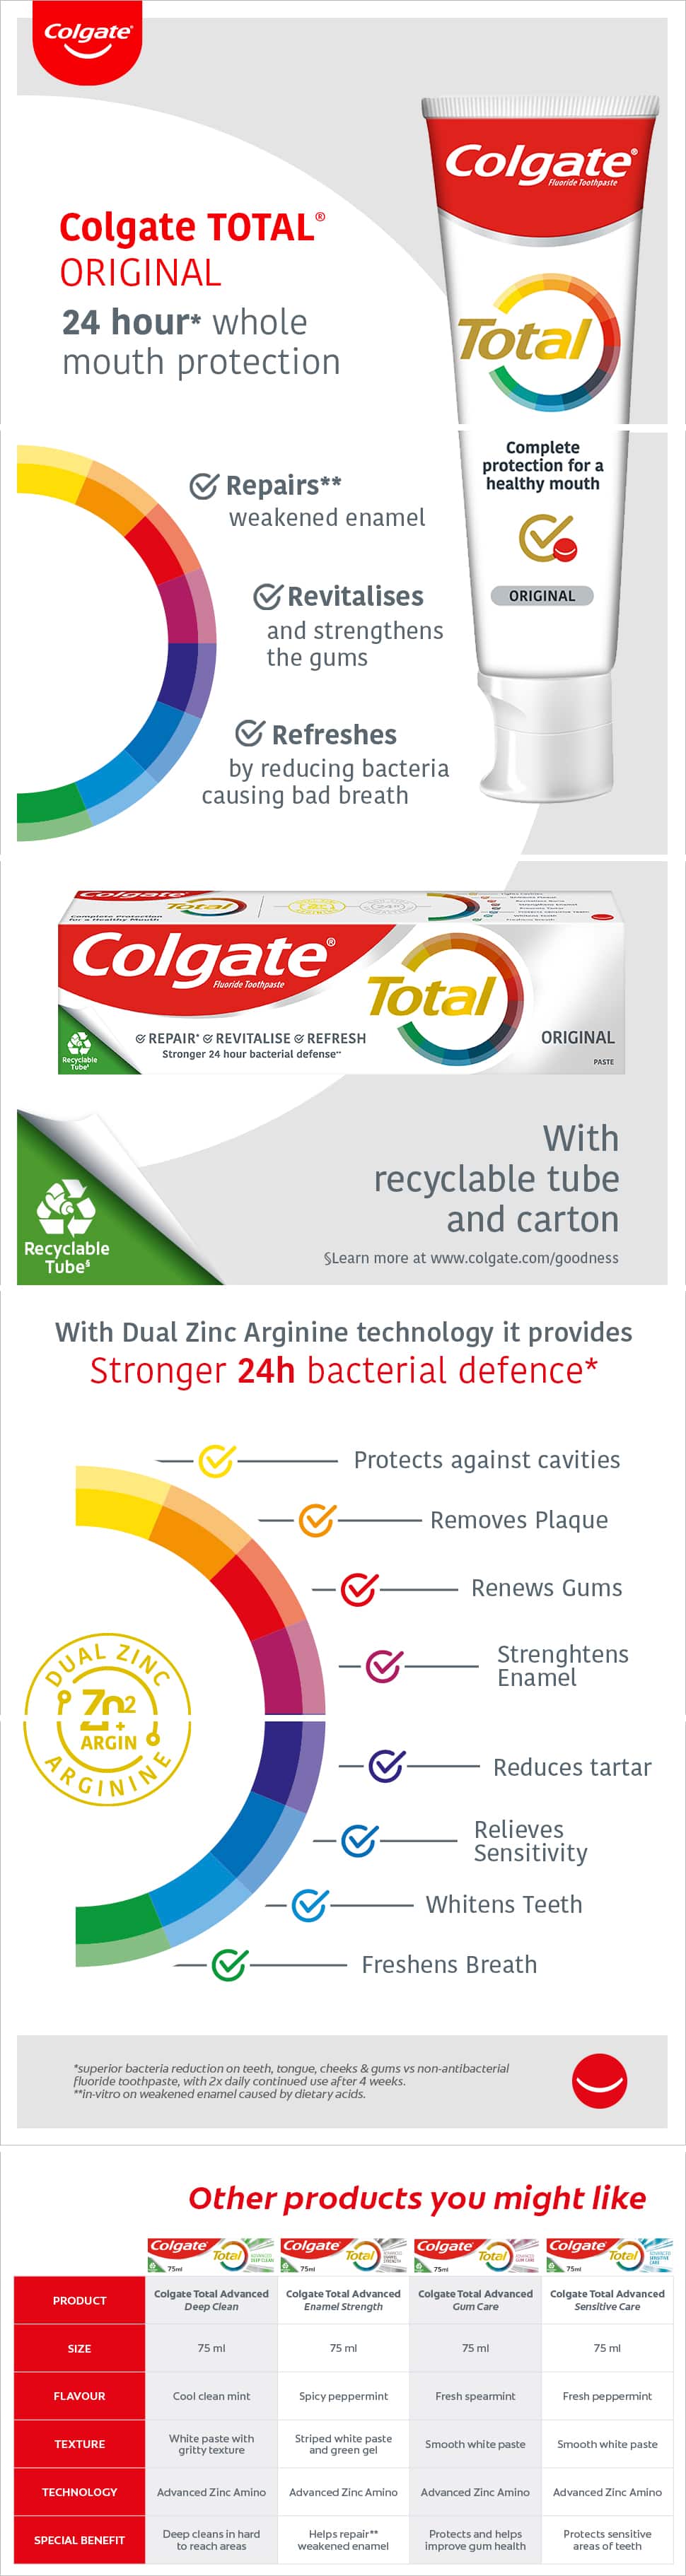 Colgate Total Original 24 hour whole mouth protection. Repairs, revitalises, refreshes. Stronger Bacterial defense.  Colgate Total, Complete protection for a healthy mouth.